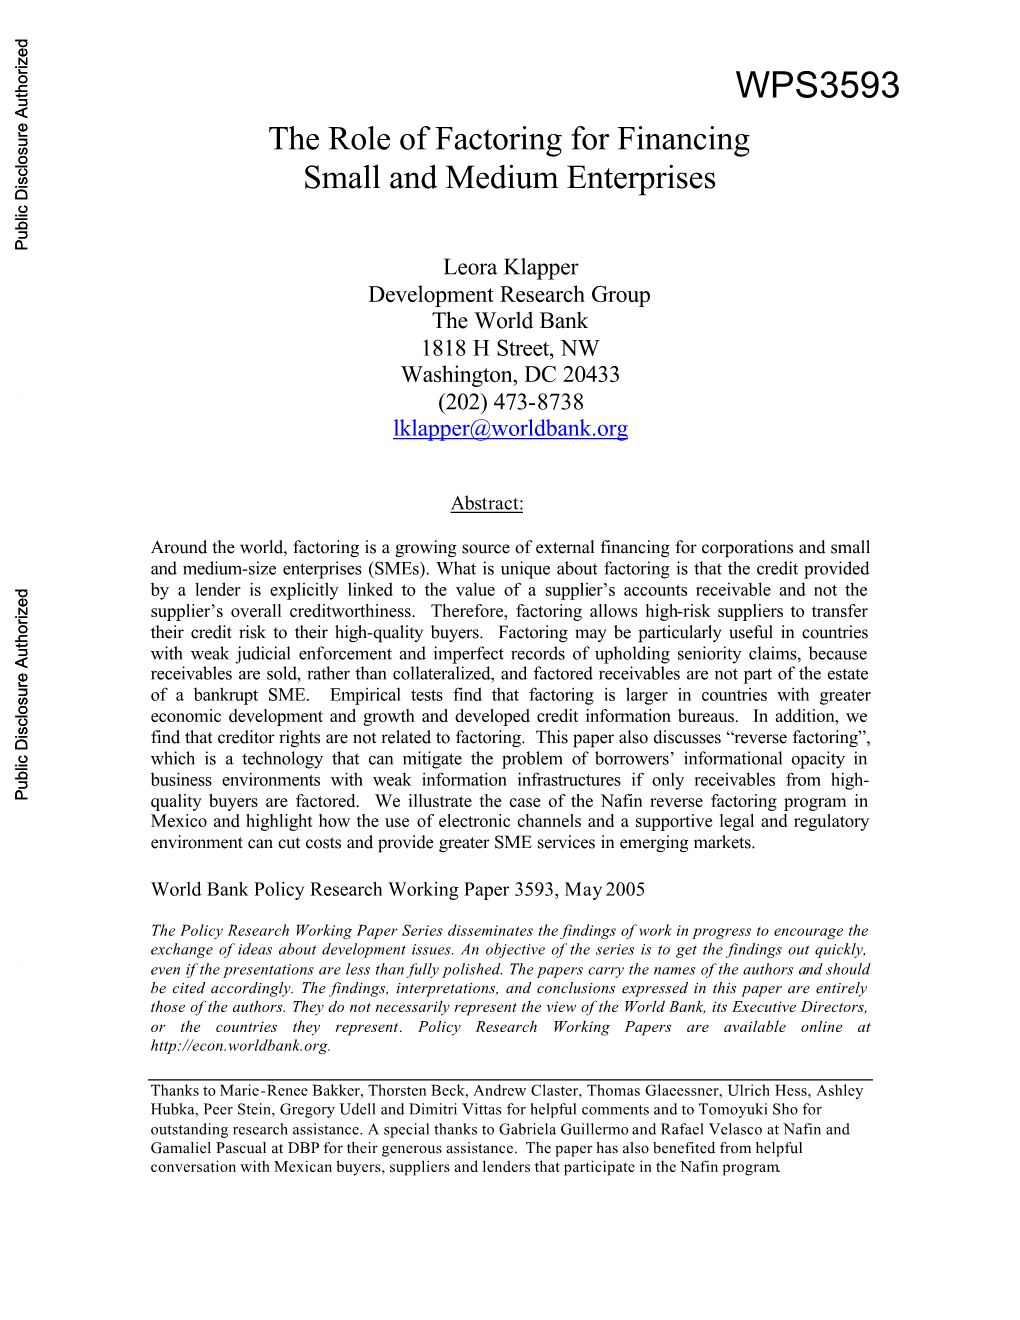 The Role of Factoring for Financing Small and Medium Enterprises